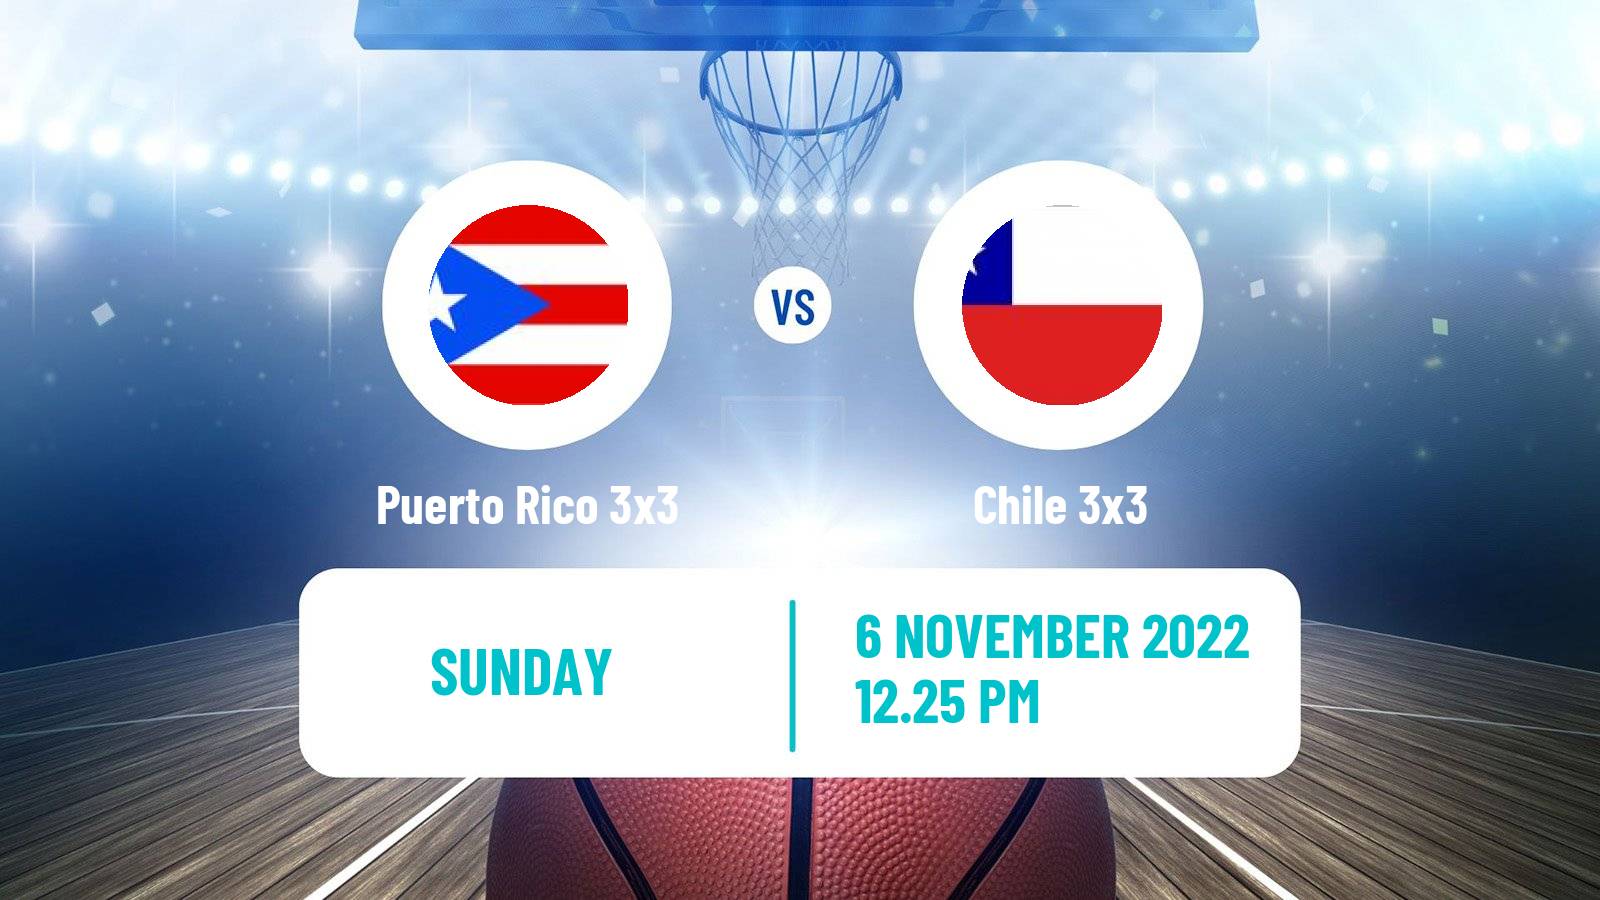 Basketball Americup 3x3 Puerto Rico 3x3 - Chile 3x3